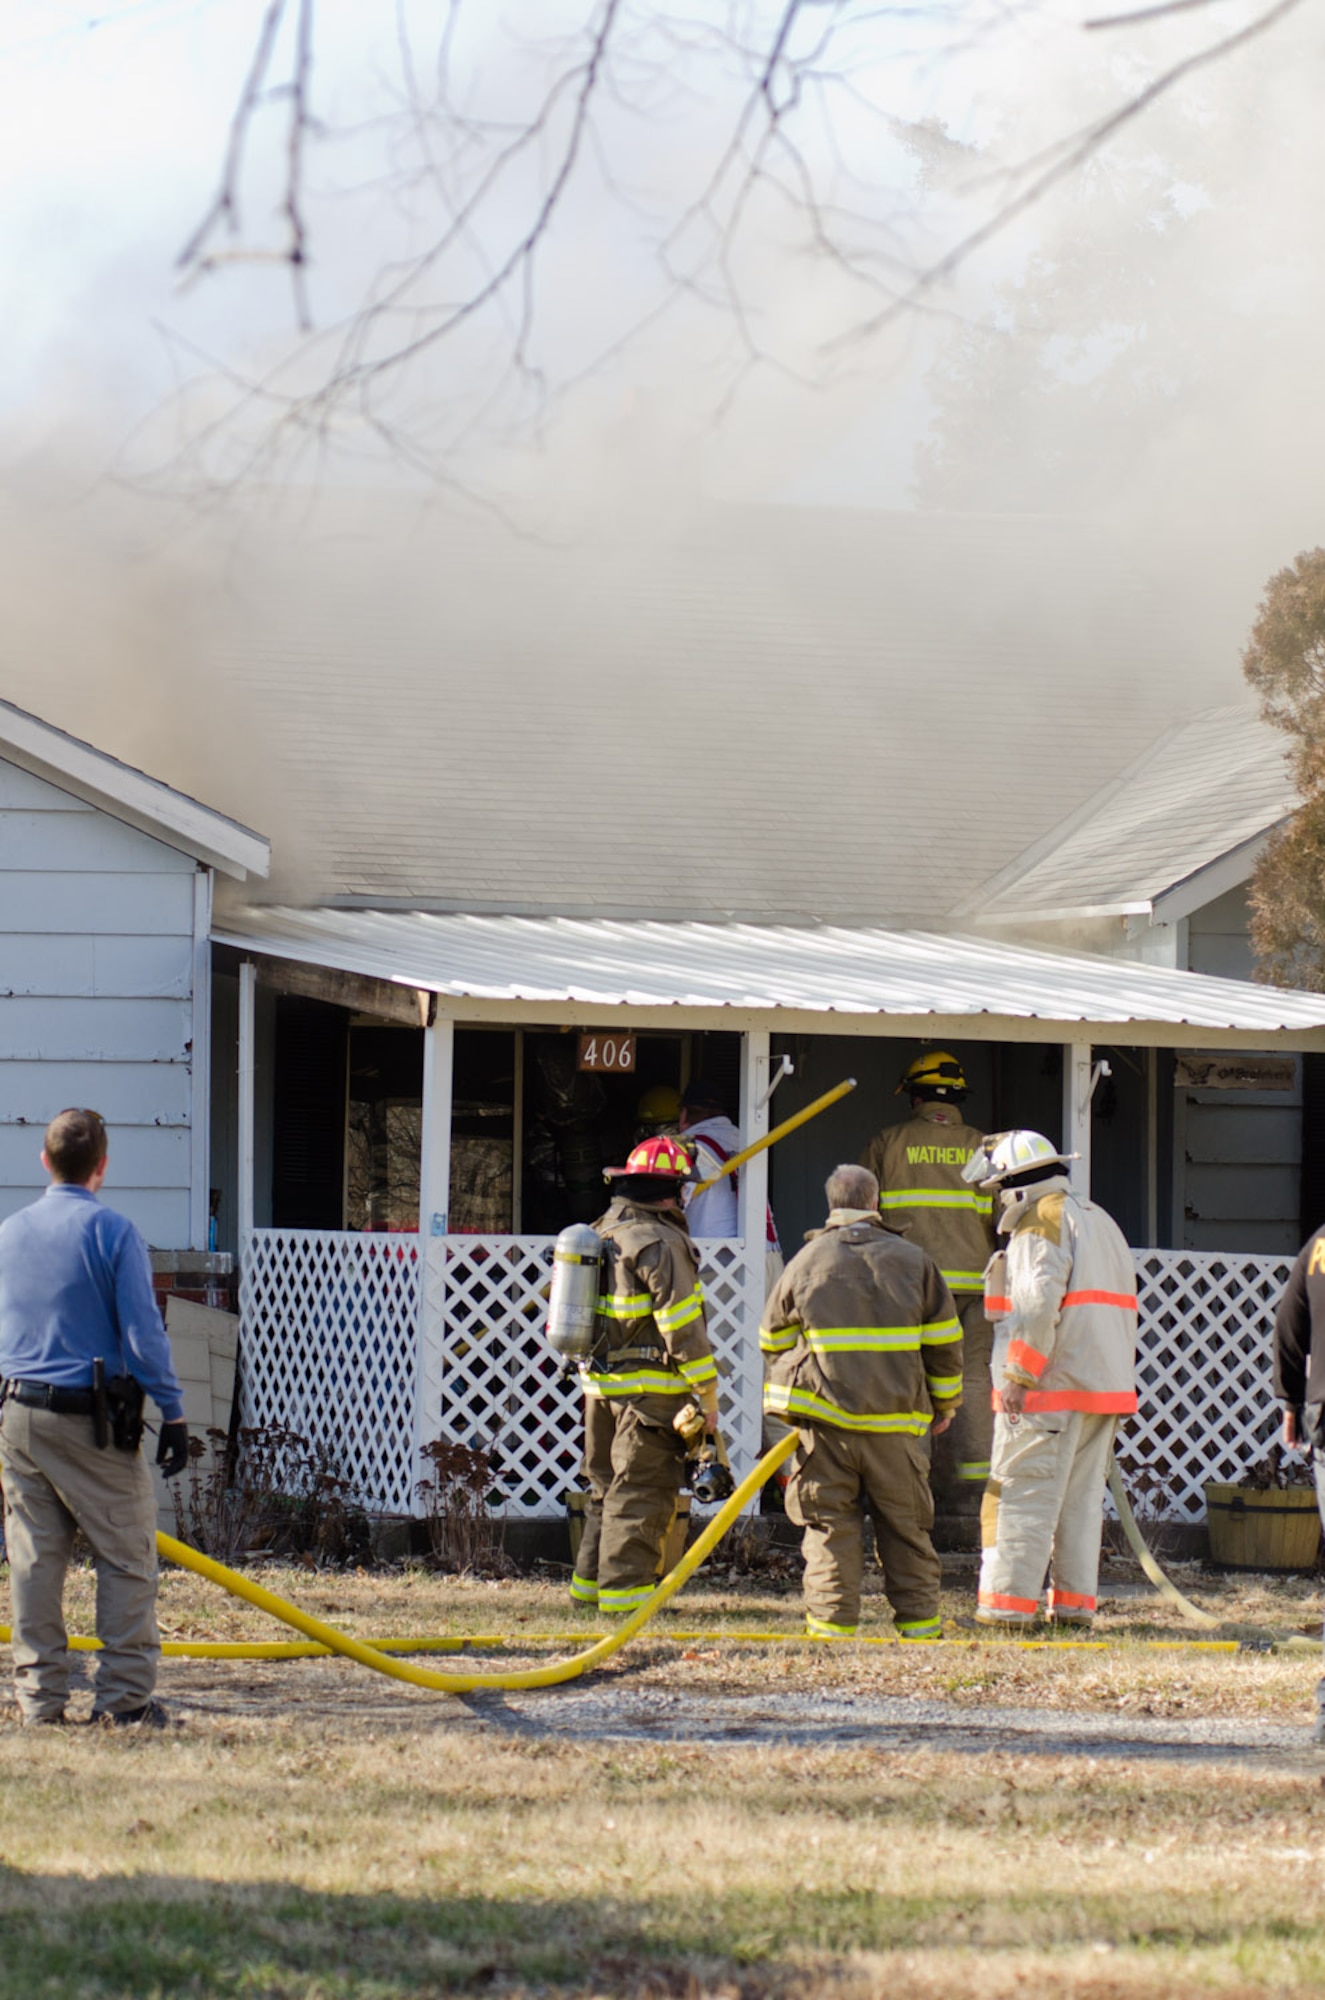 Airmen from the Missouri Guard’s 139th Airlift Wing Fire Department were called to assist in mutual aid with local fire departments in Elwood, Kan., Jan 5., 2012. The Airmen helped to extinguish a house fire. (Missouri Air National Guard photo by Staff Sgt. Michael Crane)